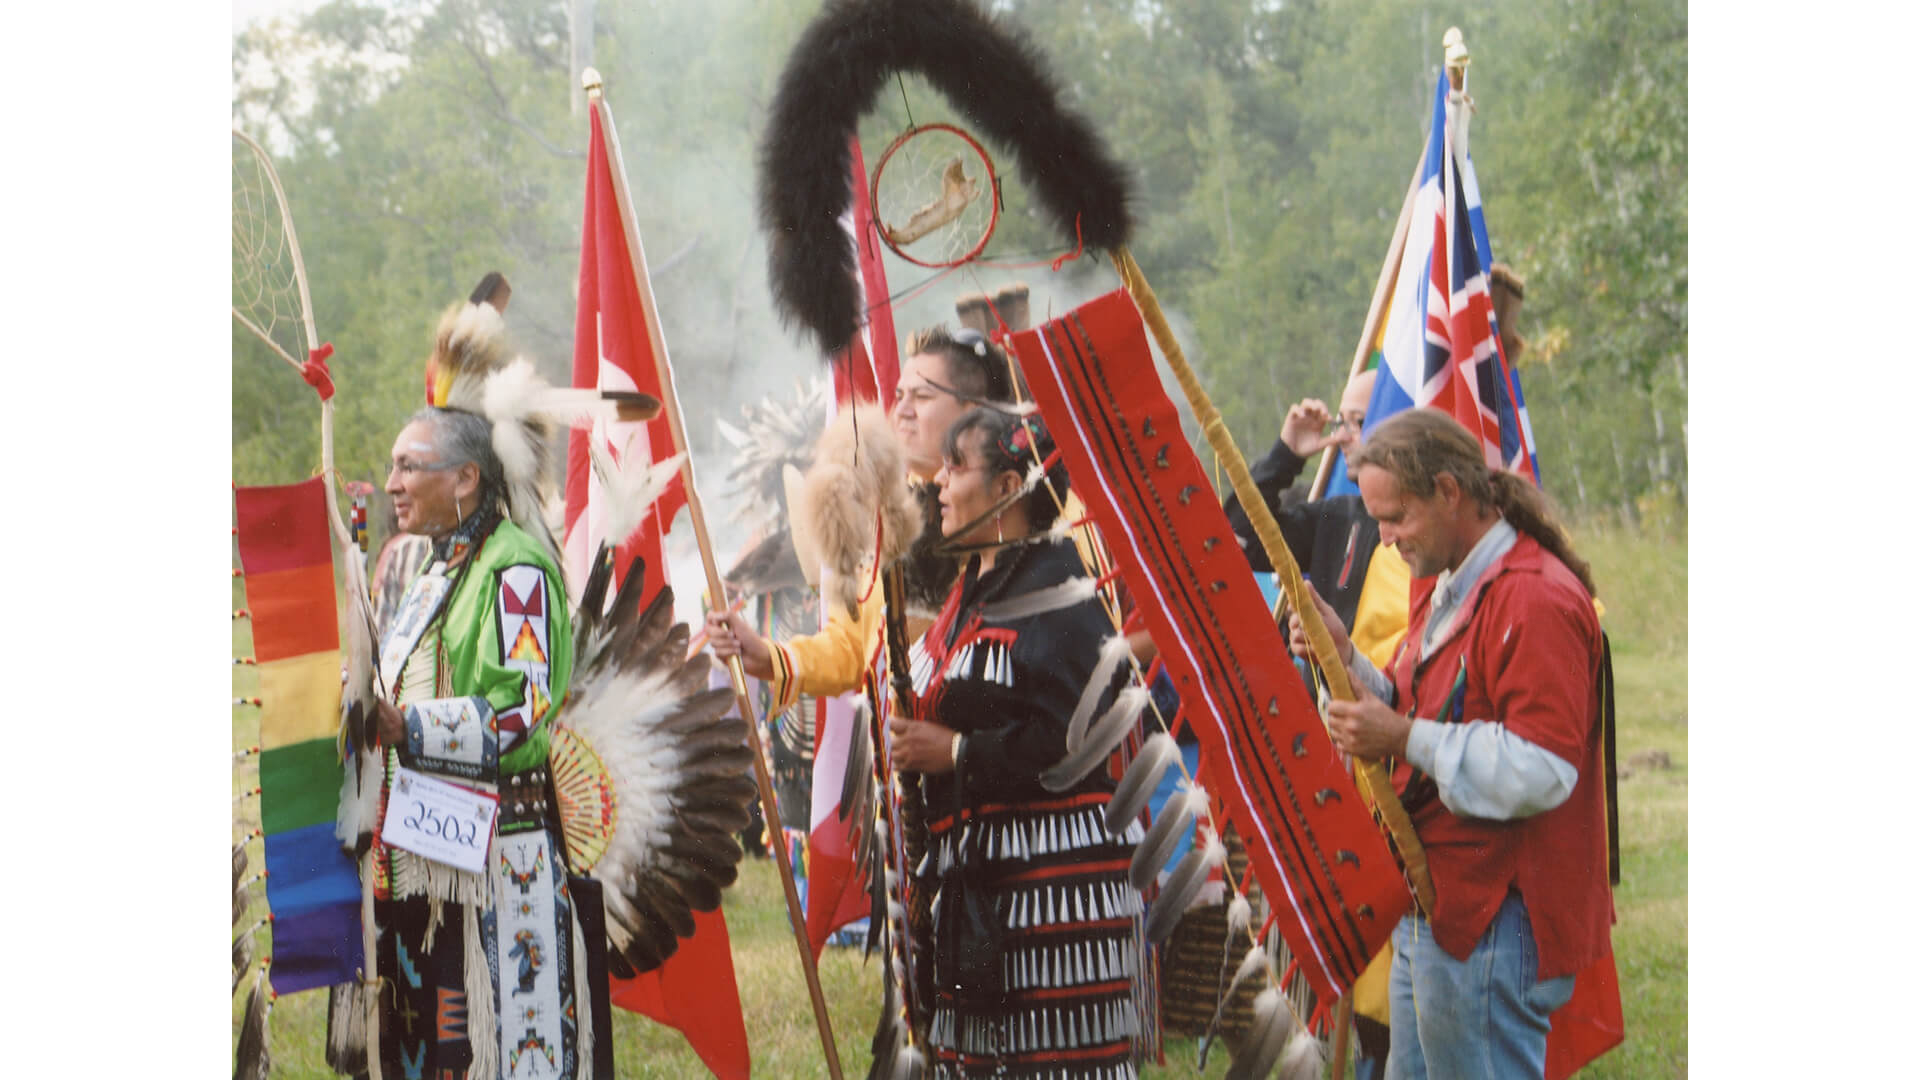 Two-Spirit powwow grand entry at the 22nd Annual International Two-Spirit Gathering held at a retreat centre outside of Winnipeg.